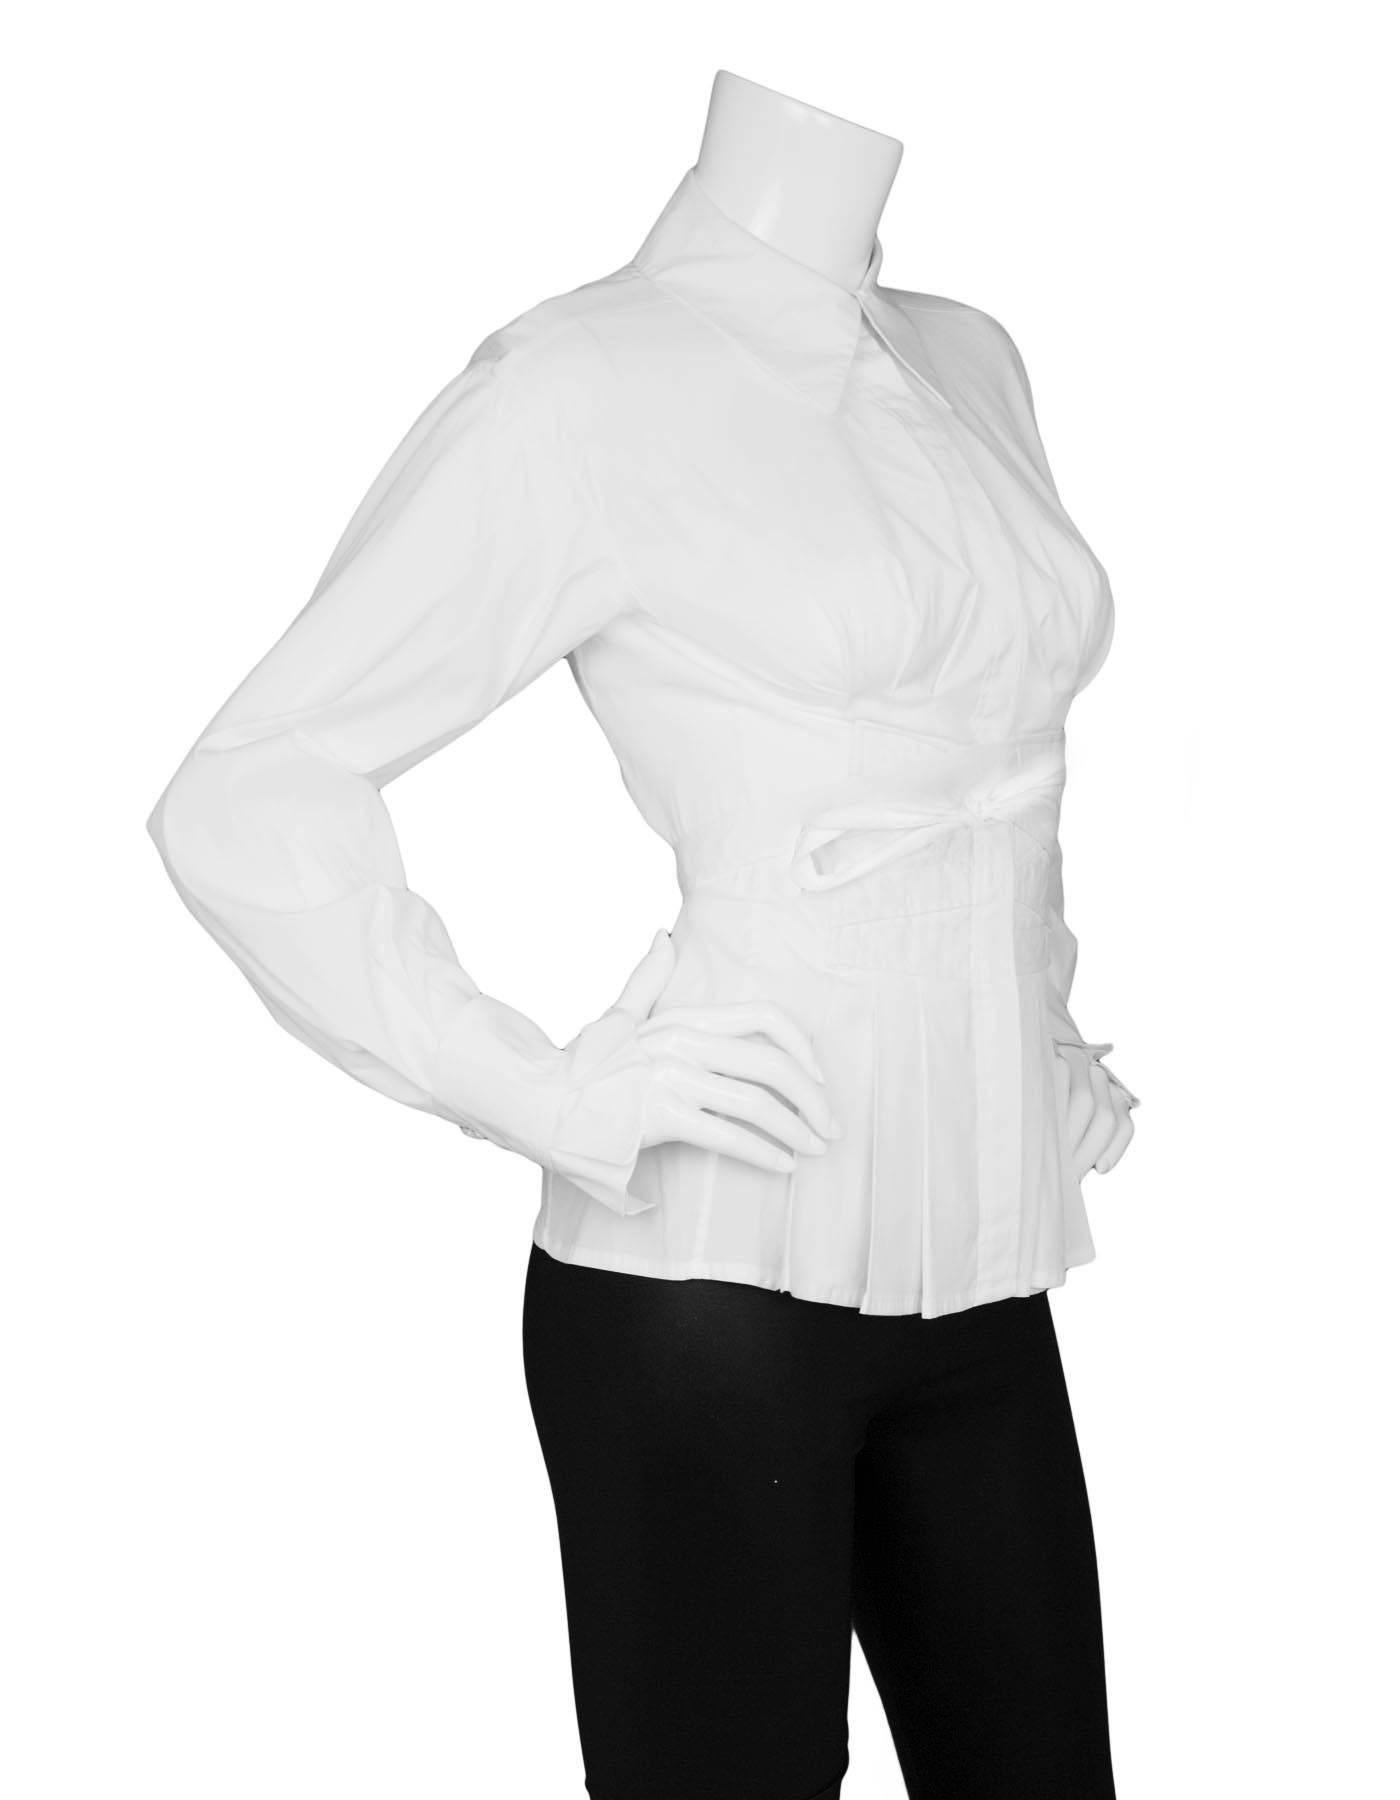 Yves Saint Laurent White Cotton Button Down Top 
Features pleating and faux corset tie in front

Made In: Italy
Color: White
Composition: 75% cotton, 21% nylon, 4% spandex
Lining: None
Closure/Opening: Button down front
Exterior Pockets: